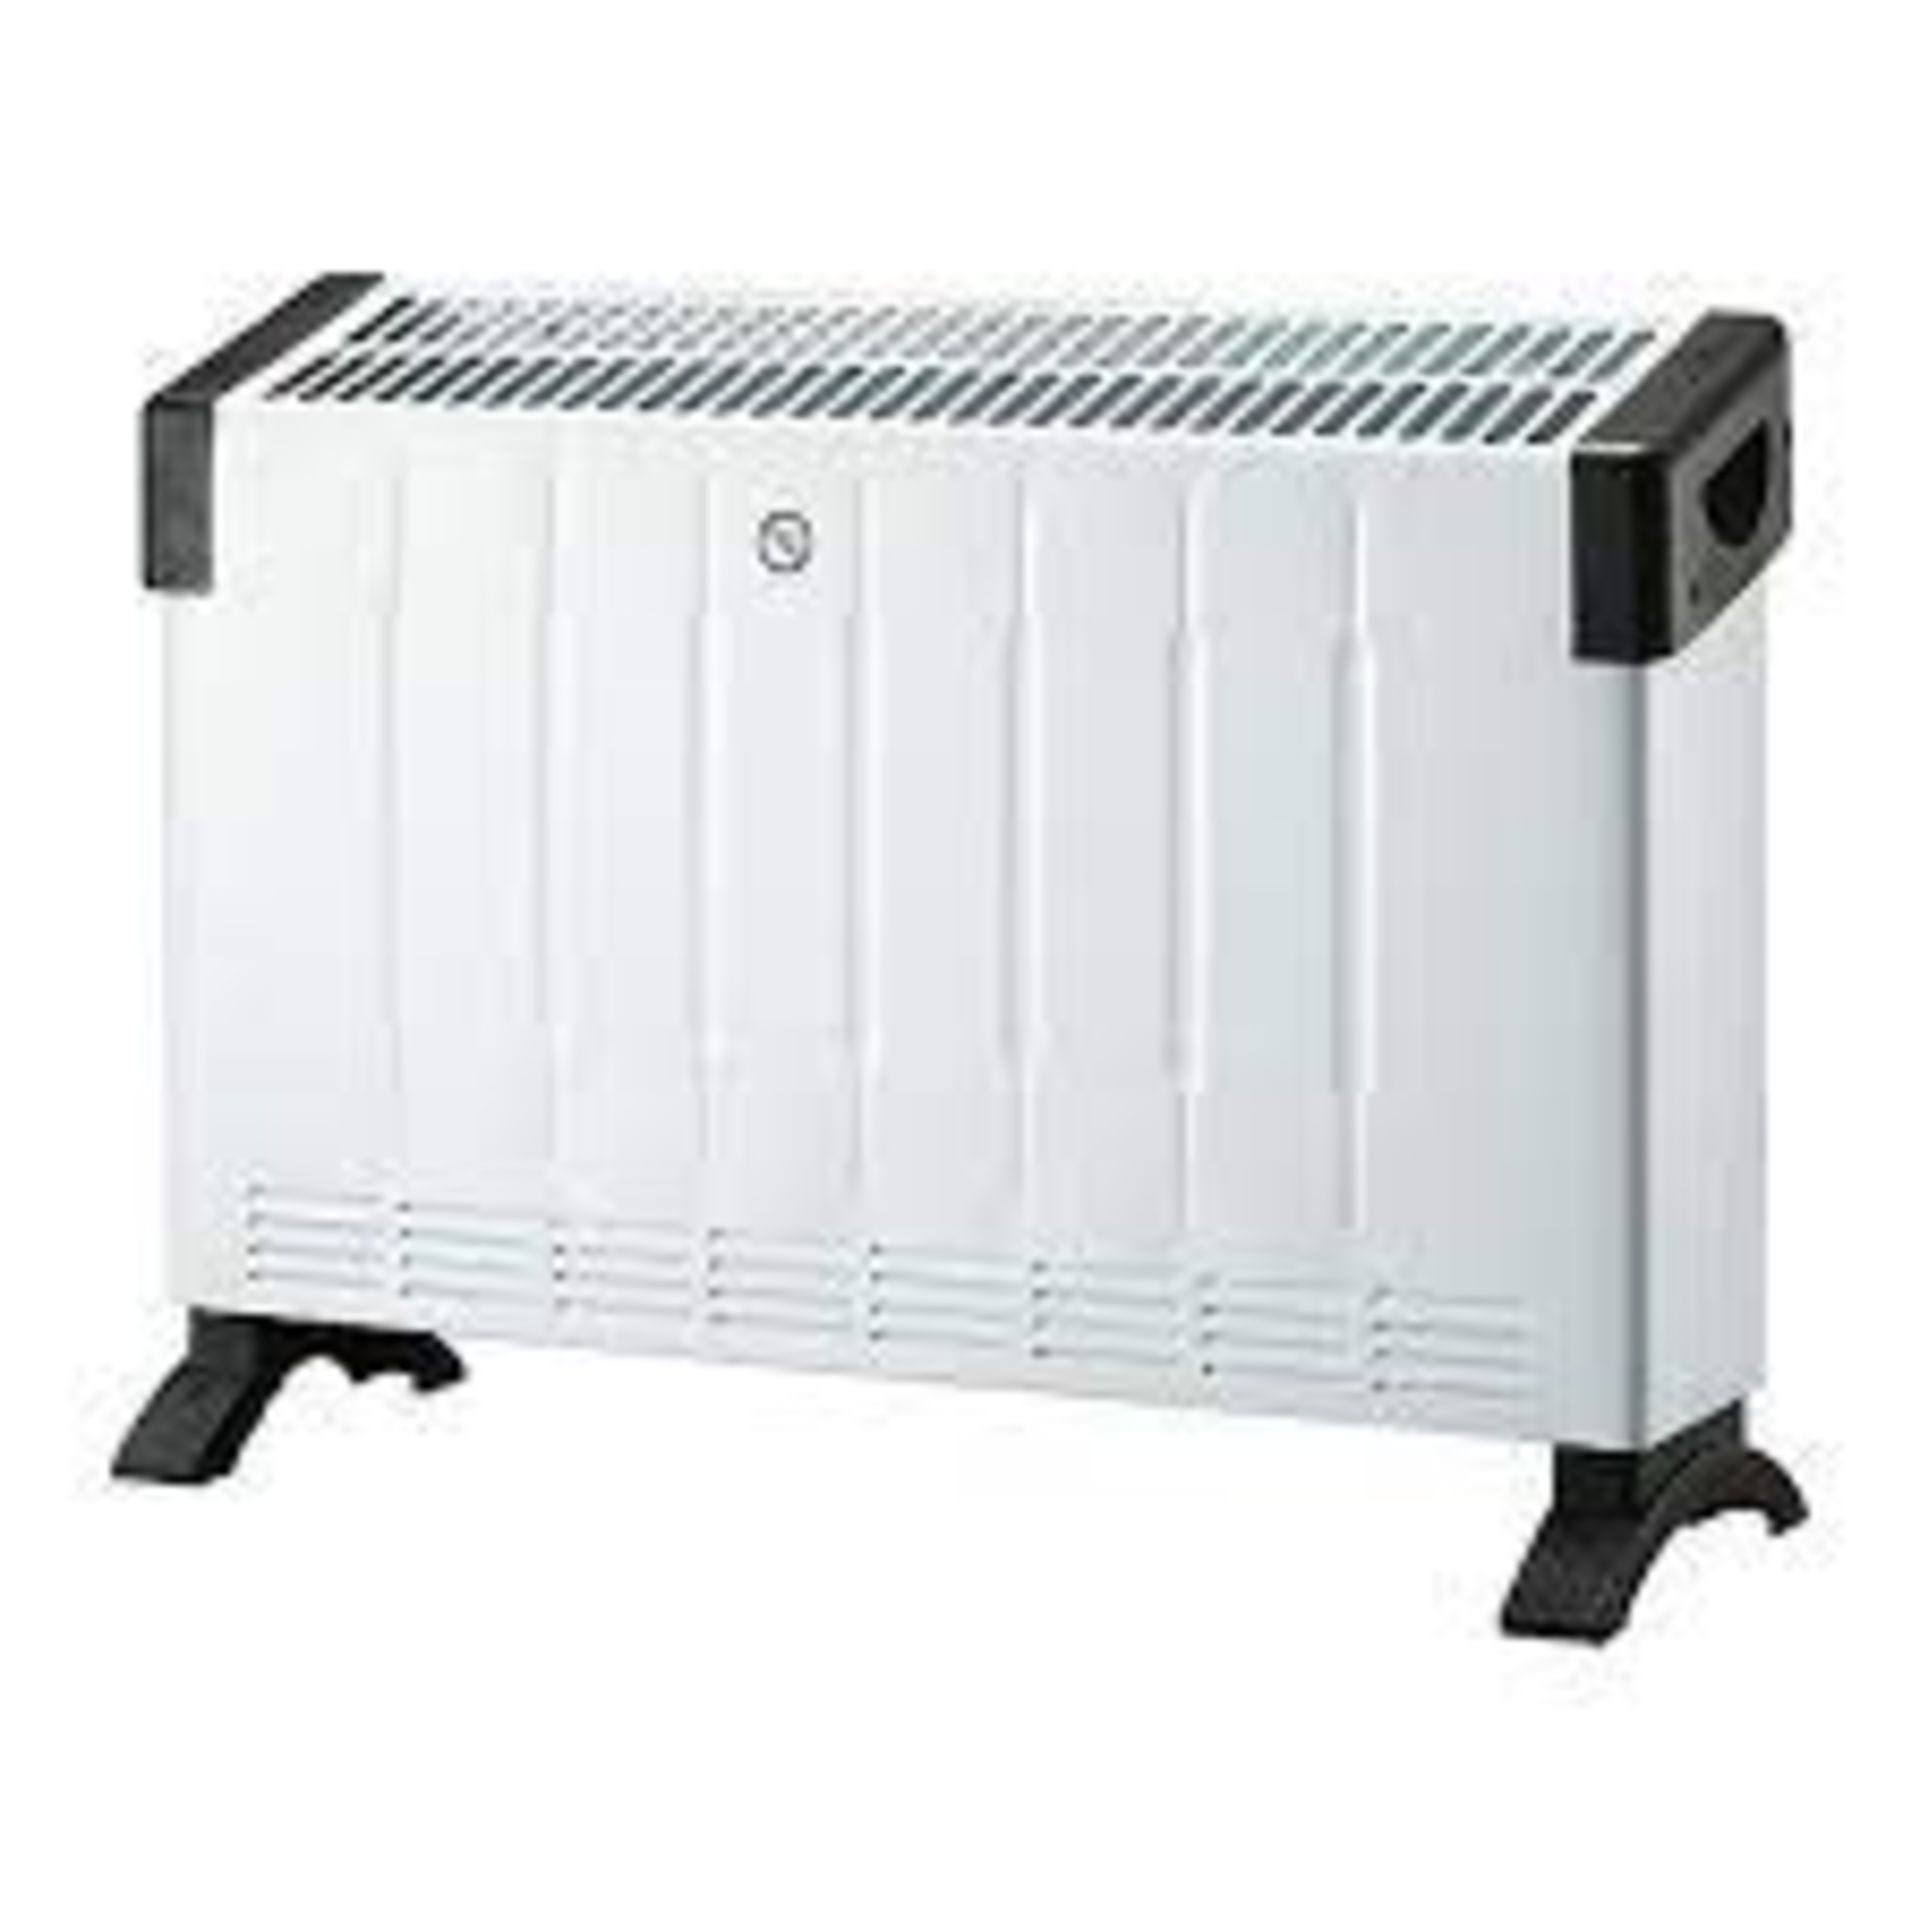 4 x 2000W White Convector heater. -ER51. Keep warm and cosy with this 2000W freestanding convector